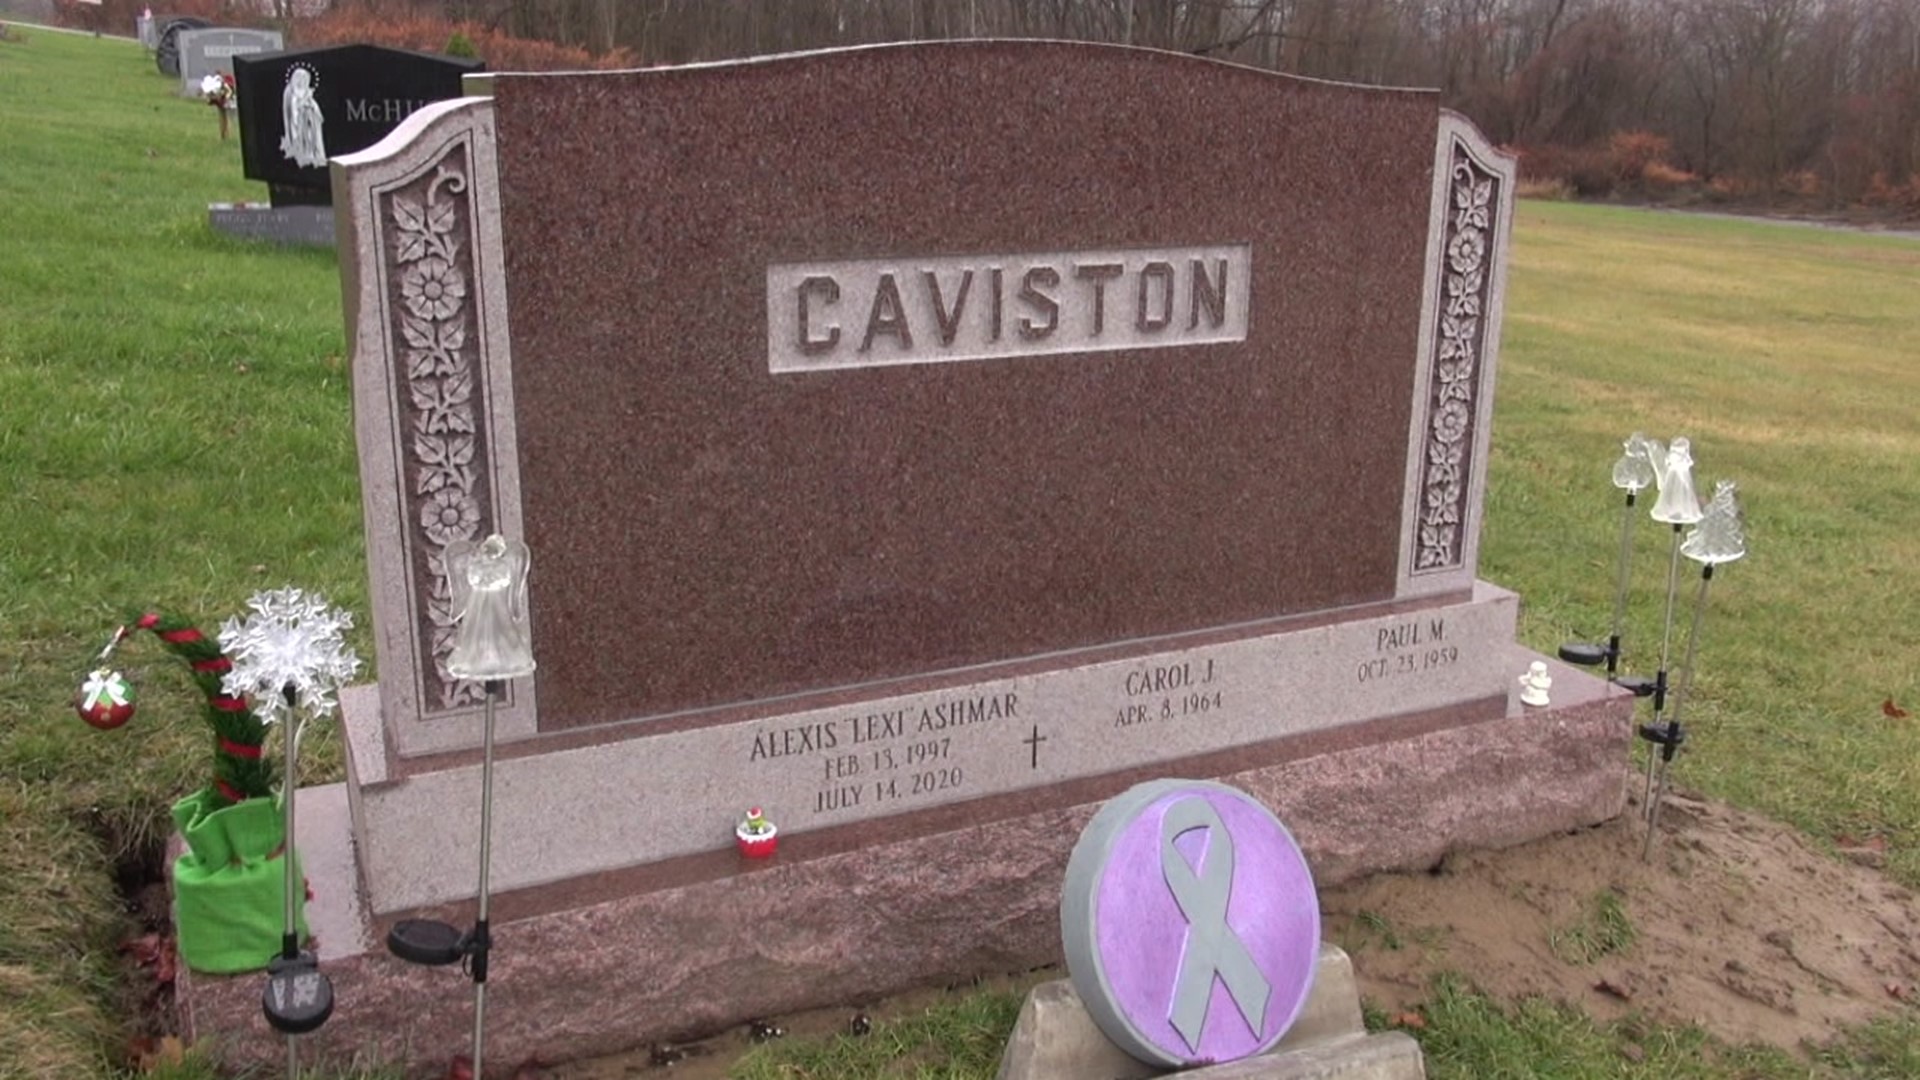 Holiday display at grave was dying woman's last wish.